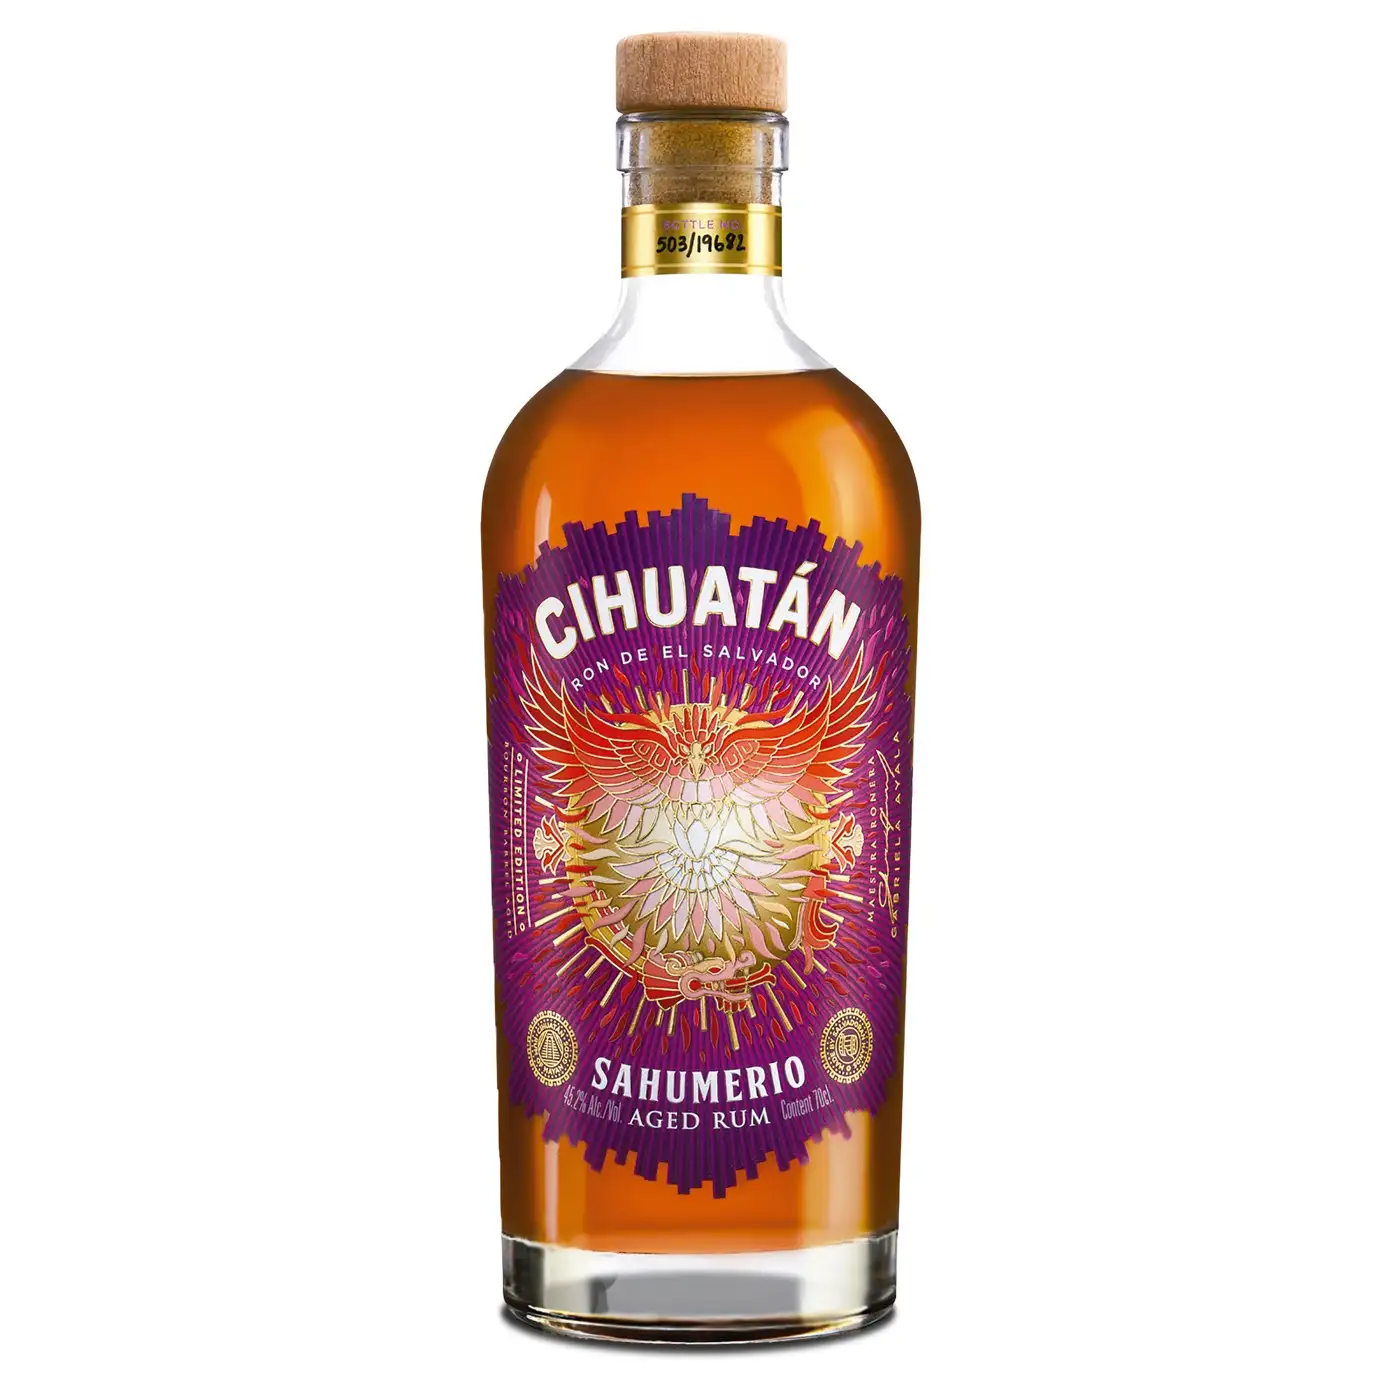 Image of the front of the bottle of the rum Cihuatán Sahumerio